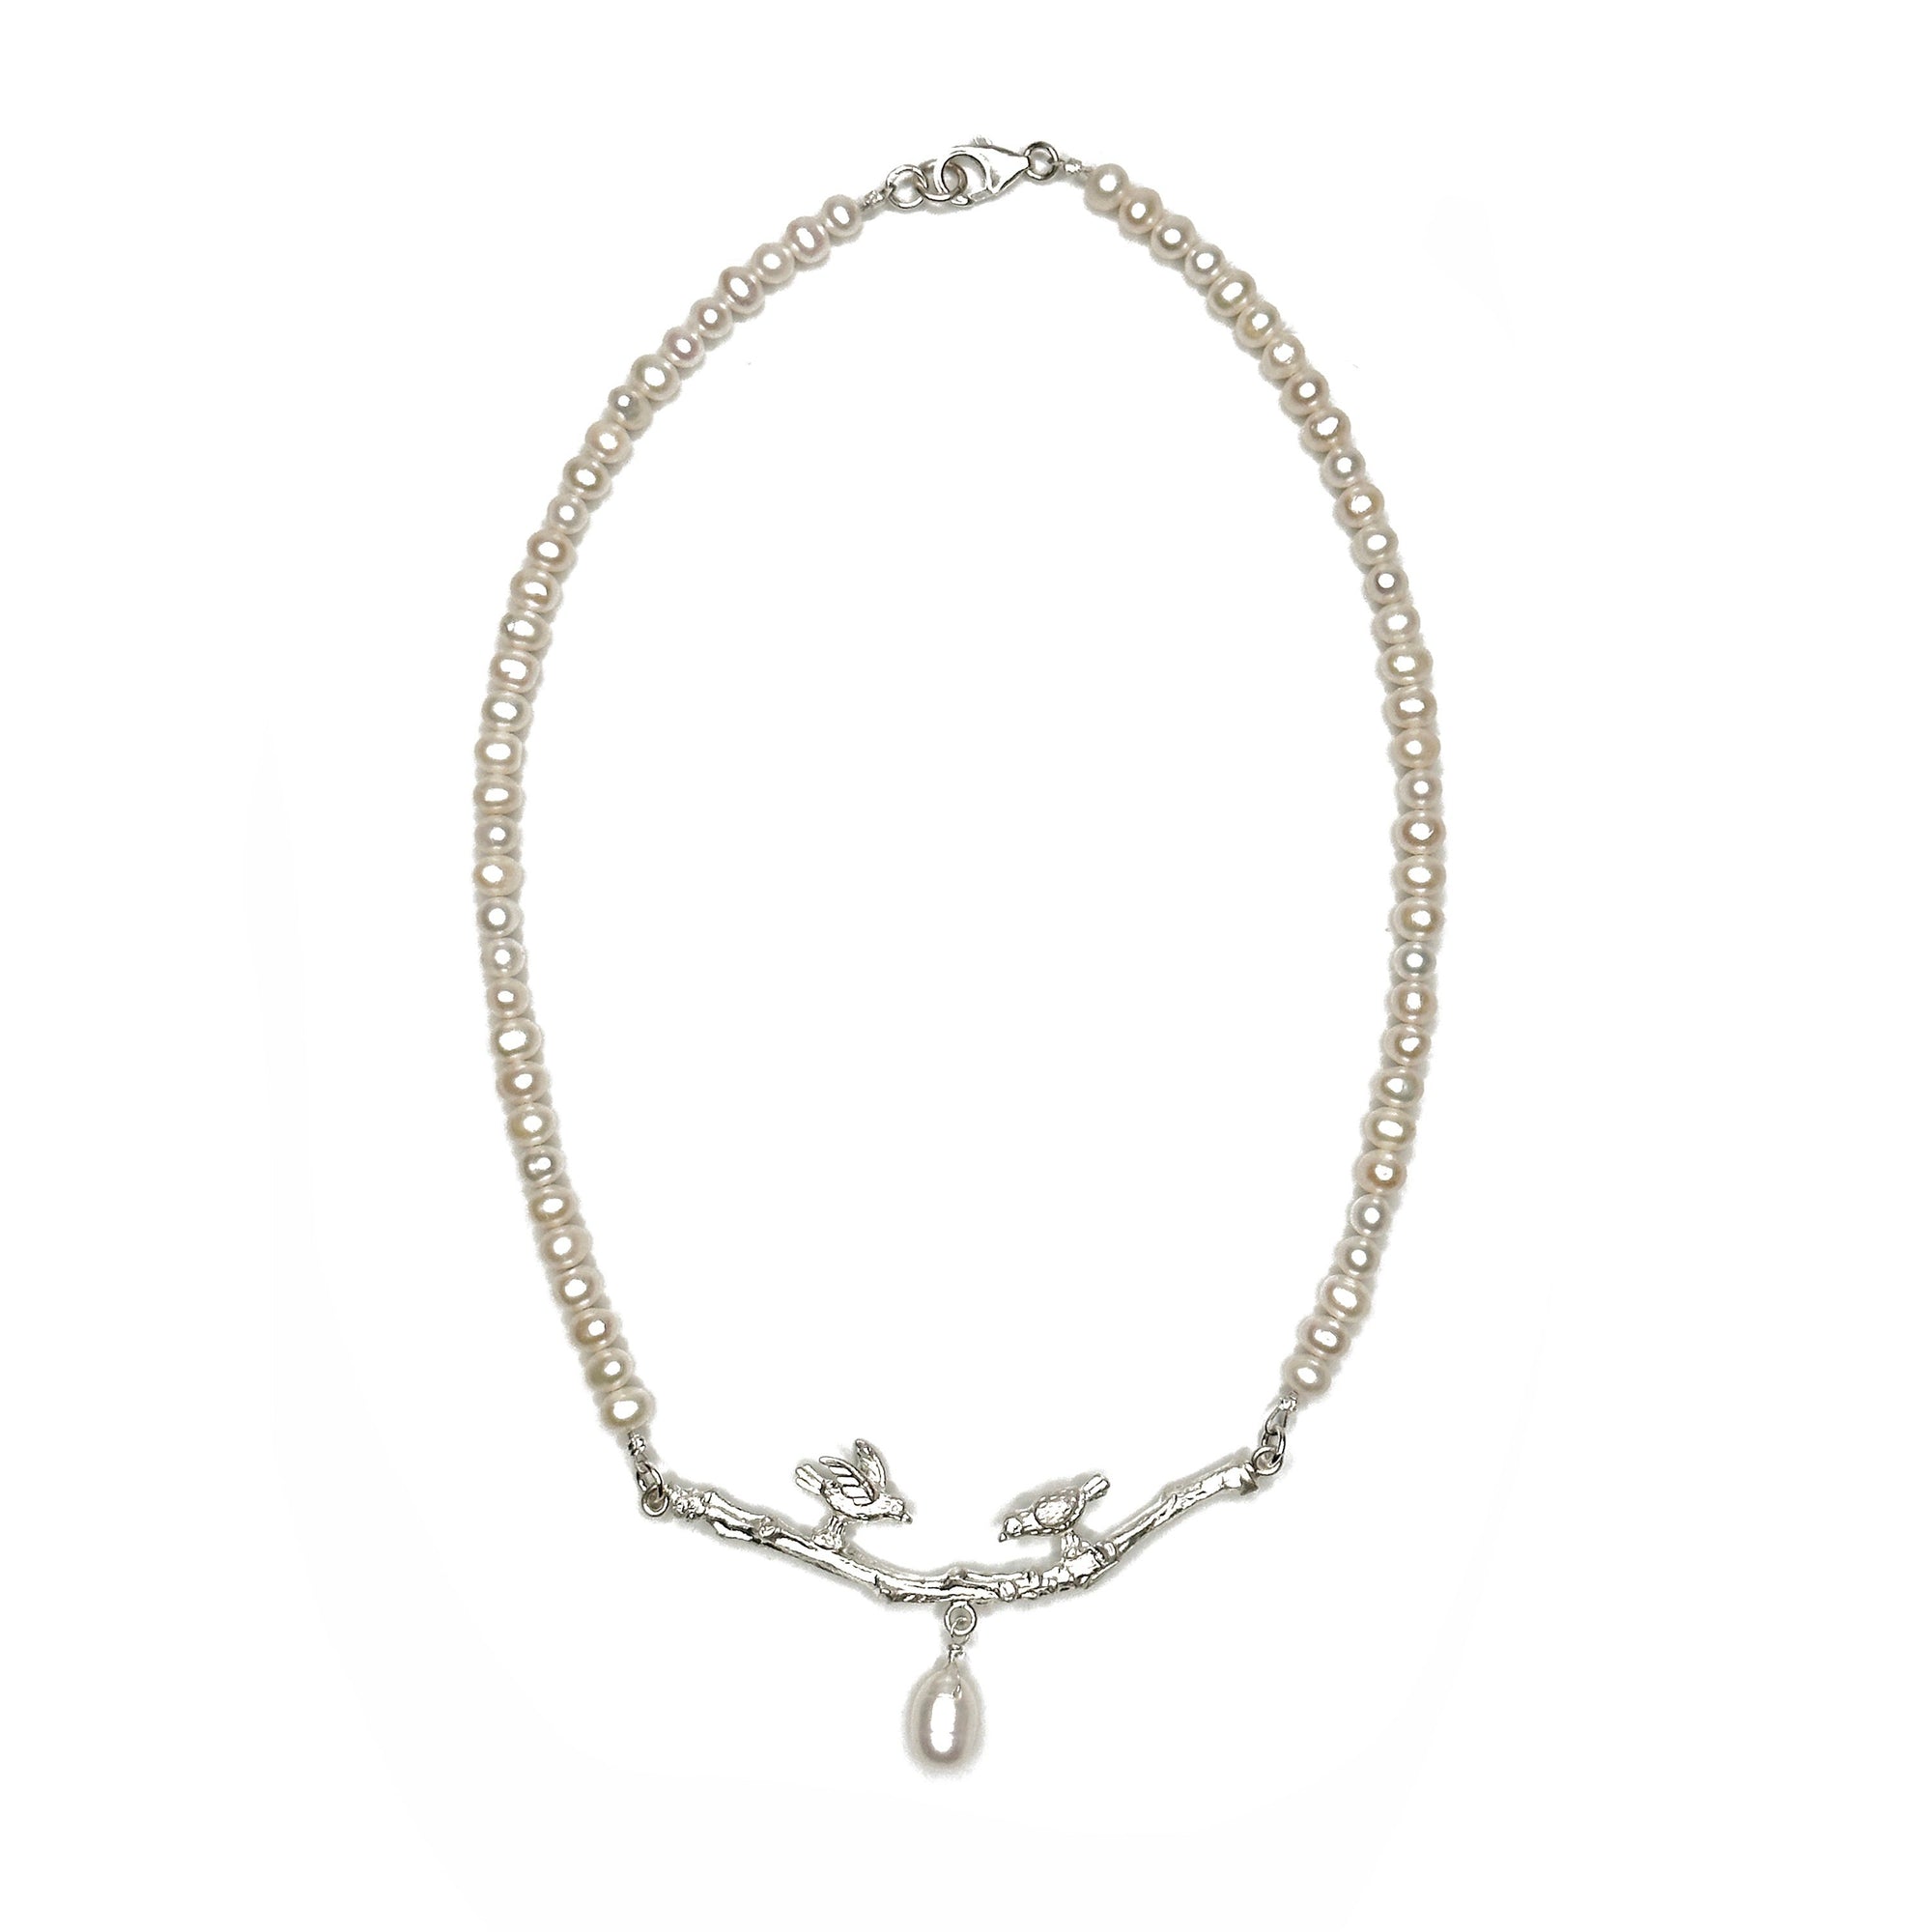 Pearl Necklace with Sterling Birds on a Branch